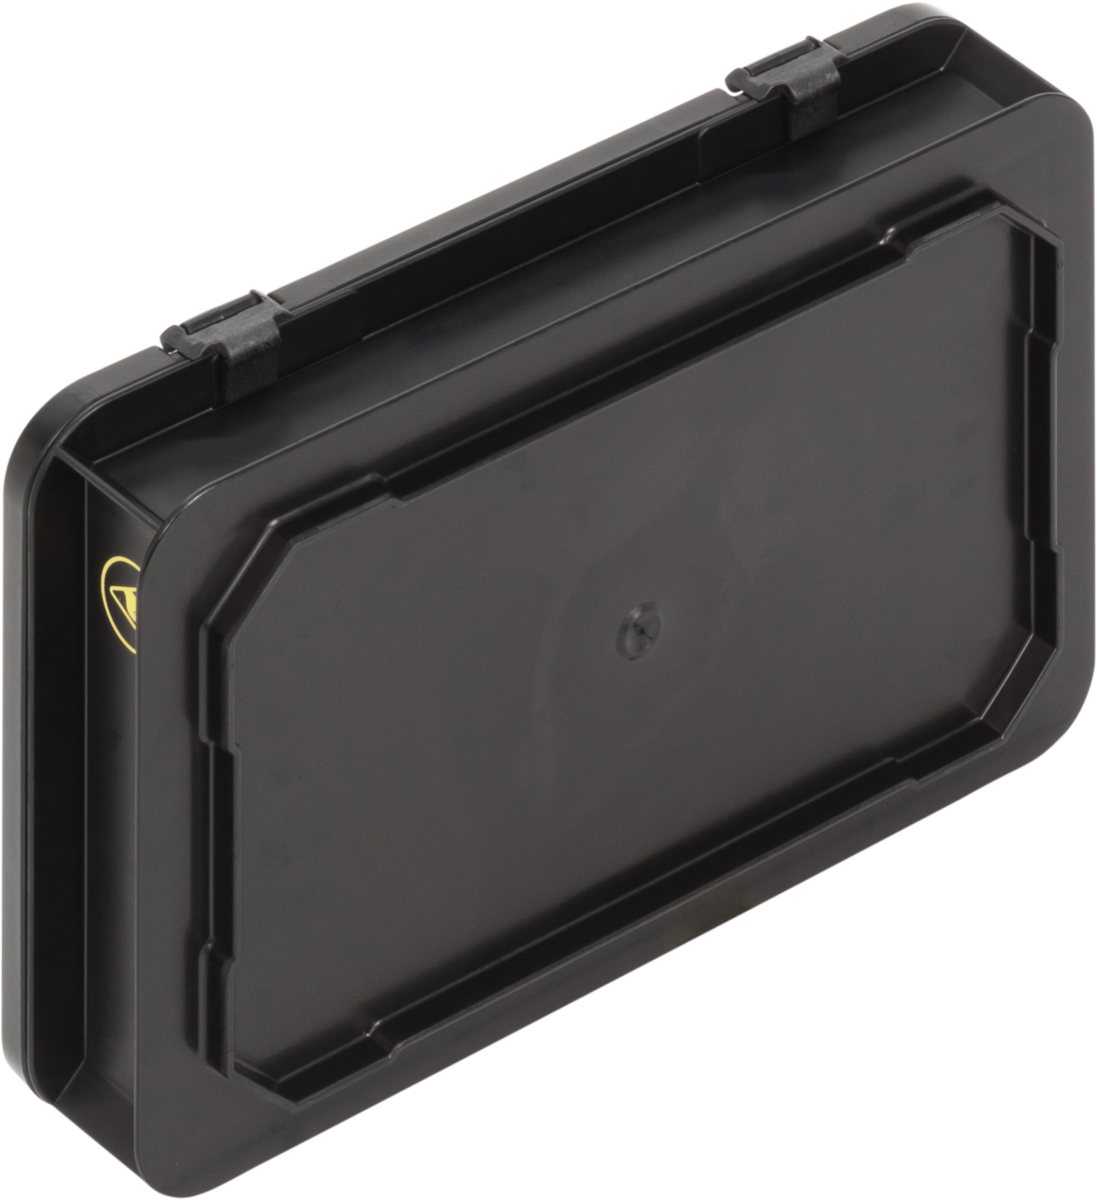 ESD-Safe-SGL-Norm-Carrying-Cases-Flat-Base-007-Ref.-3204.390.992_1004259_300x200x69_02